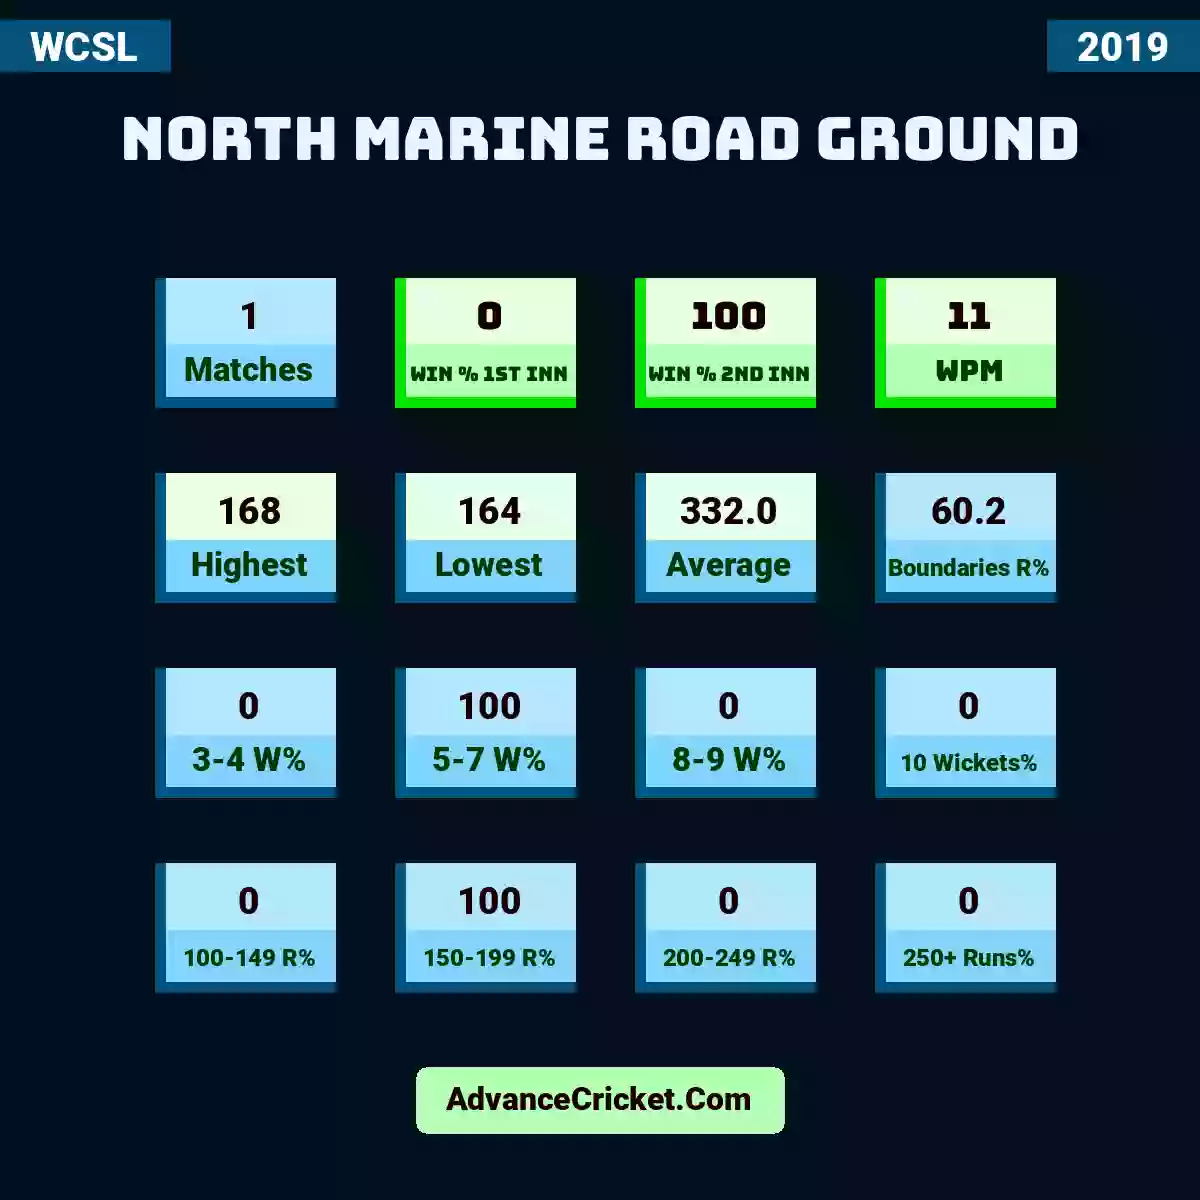 Image showing North Marine Road Ground with Matches: 1, Win % 1st Inn: 0, Win % 2nd Inn: 100, WPM: 11, Highest: 168, Lowest: 164, Average: 332.0, Boundaries R%: 60.2, 3-4 W%: 0, 5-7 W%: 100, 8-9 W%: 0, 10 Wickets%: 0, 100-149 R%: 0, 150-199 R%: 100, 200-249 R%: 0, 250+ Runs%: 0.